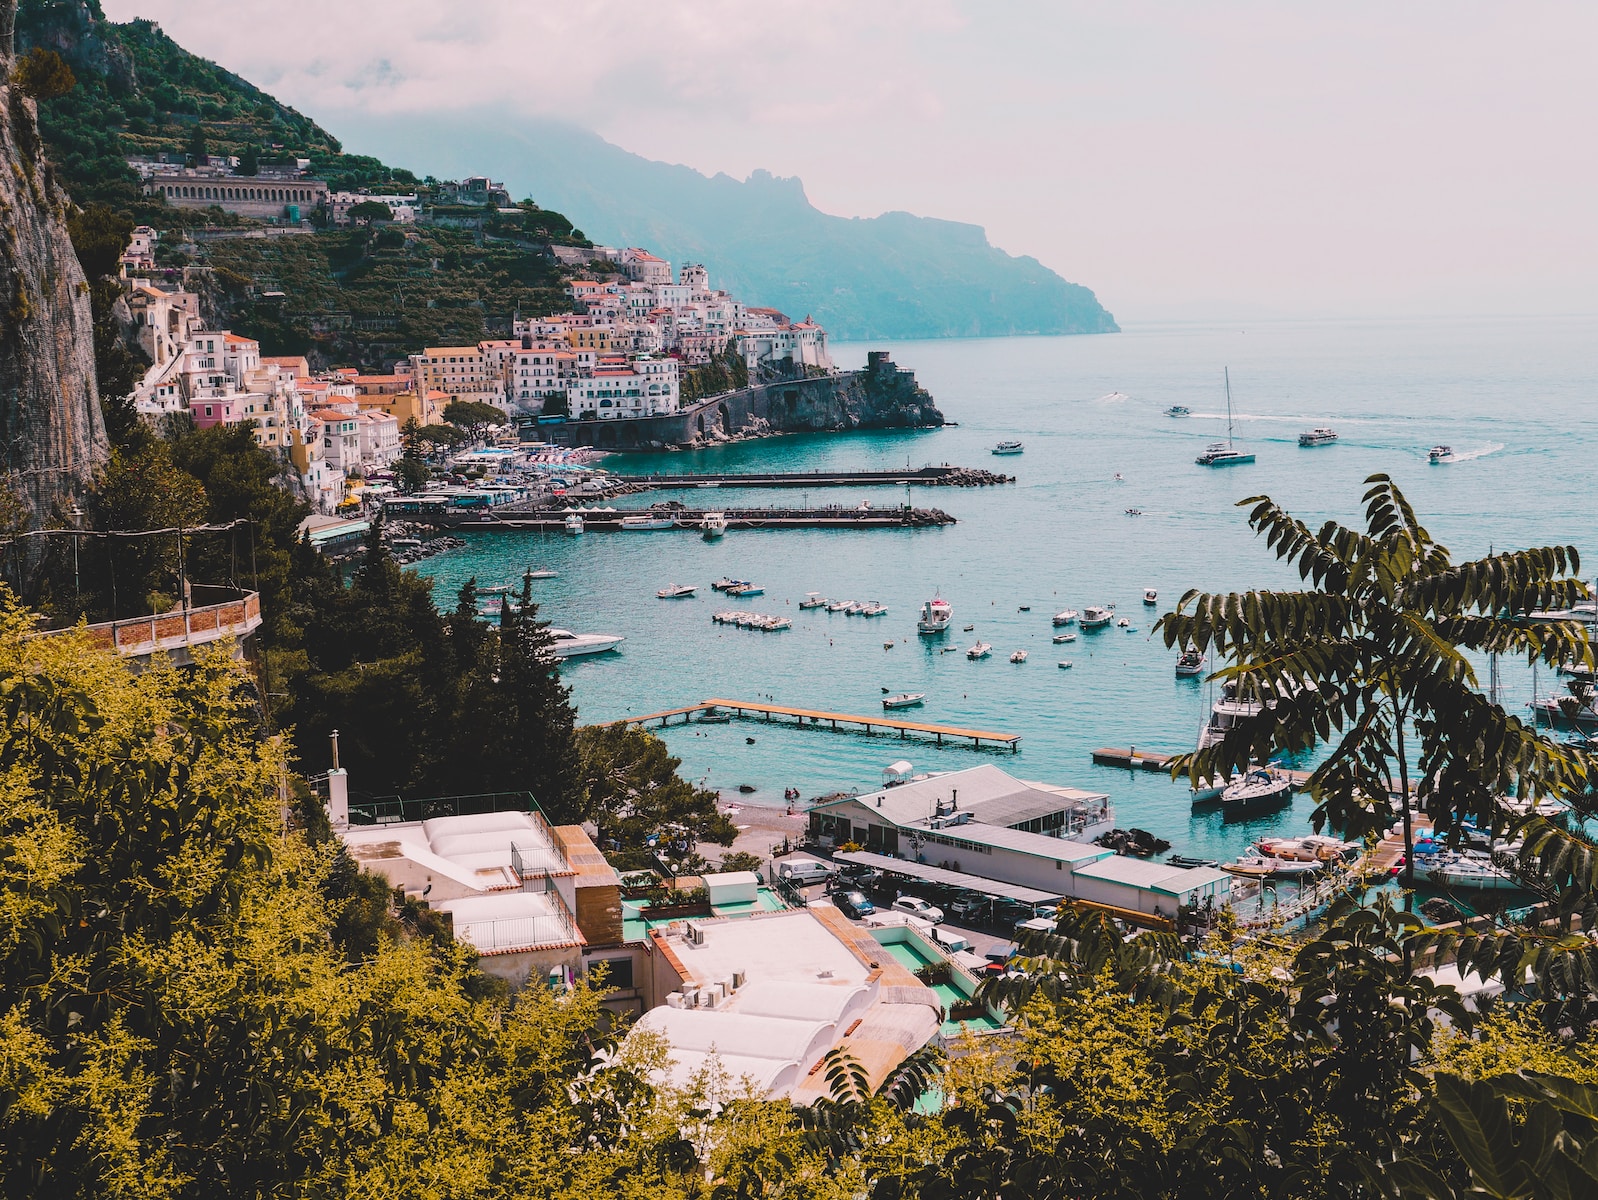 The Top Attractions & Places to Visit on the Amalfi Coast